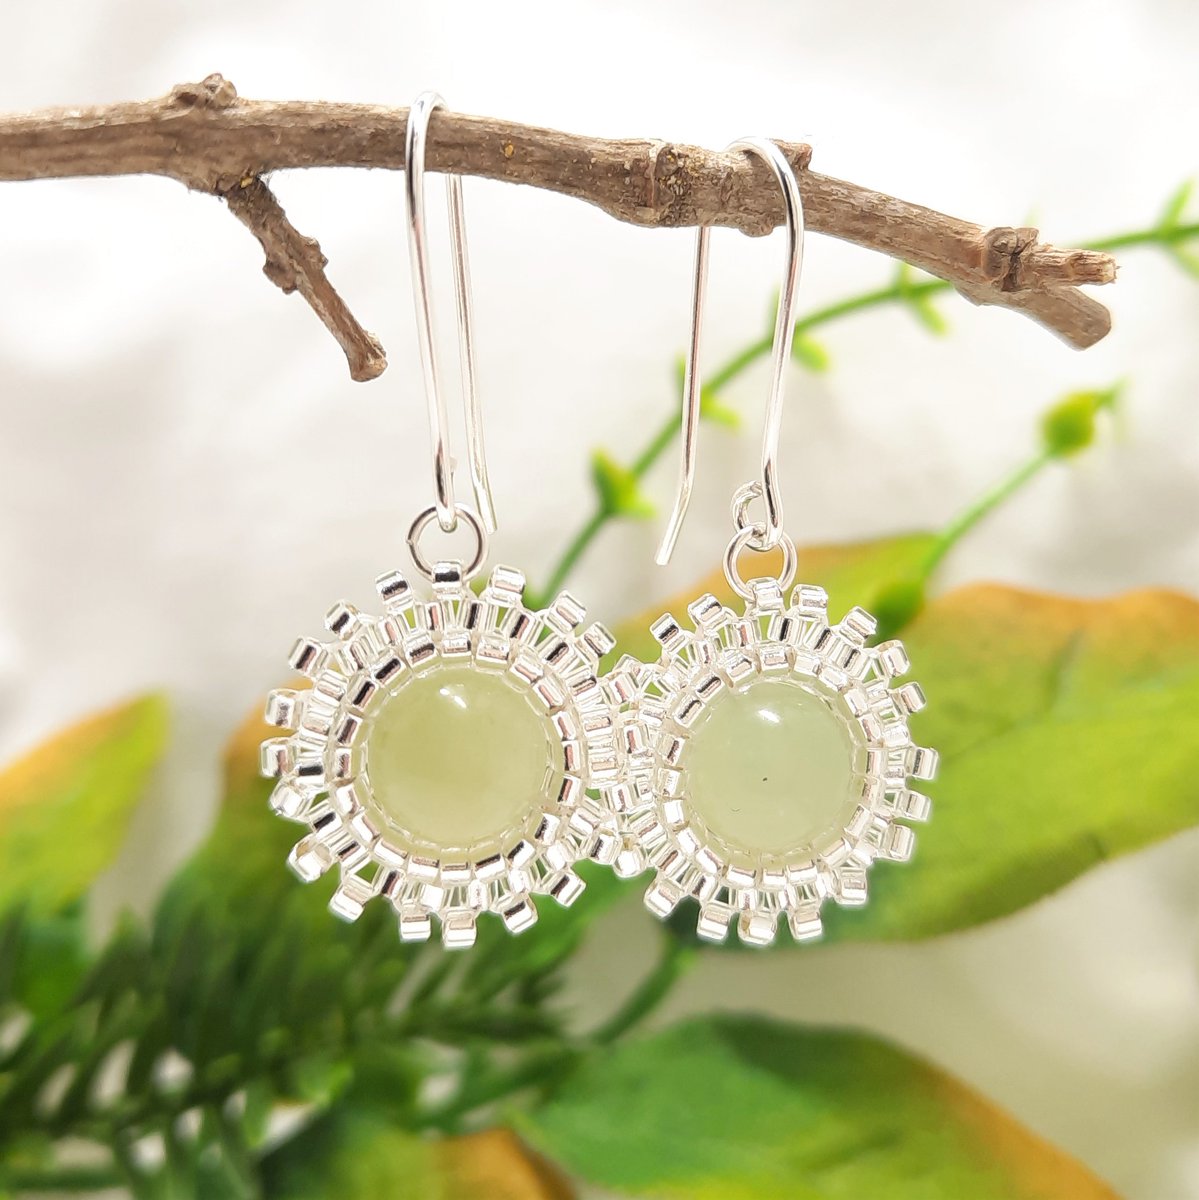 Now these are pretty earrings. Once again the colour of the jade is a delicate shade of green. They have silver glass bead bezels woven about their diameter so that you can see the jade on both sides cherylsjewellery.etsy.com/uk/listing/112… #mhhsbd #earlybiz #jade